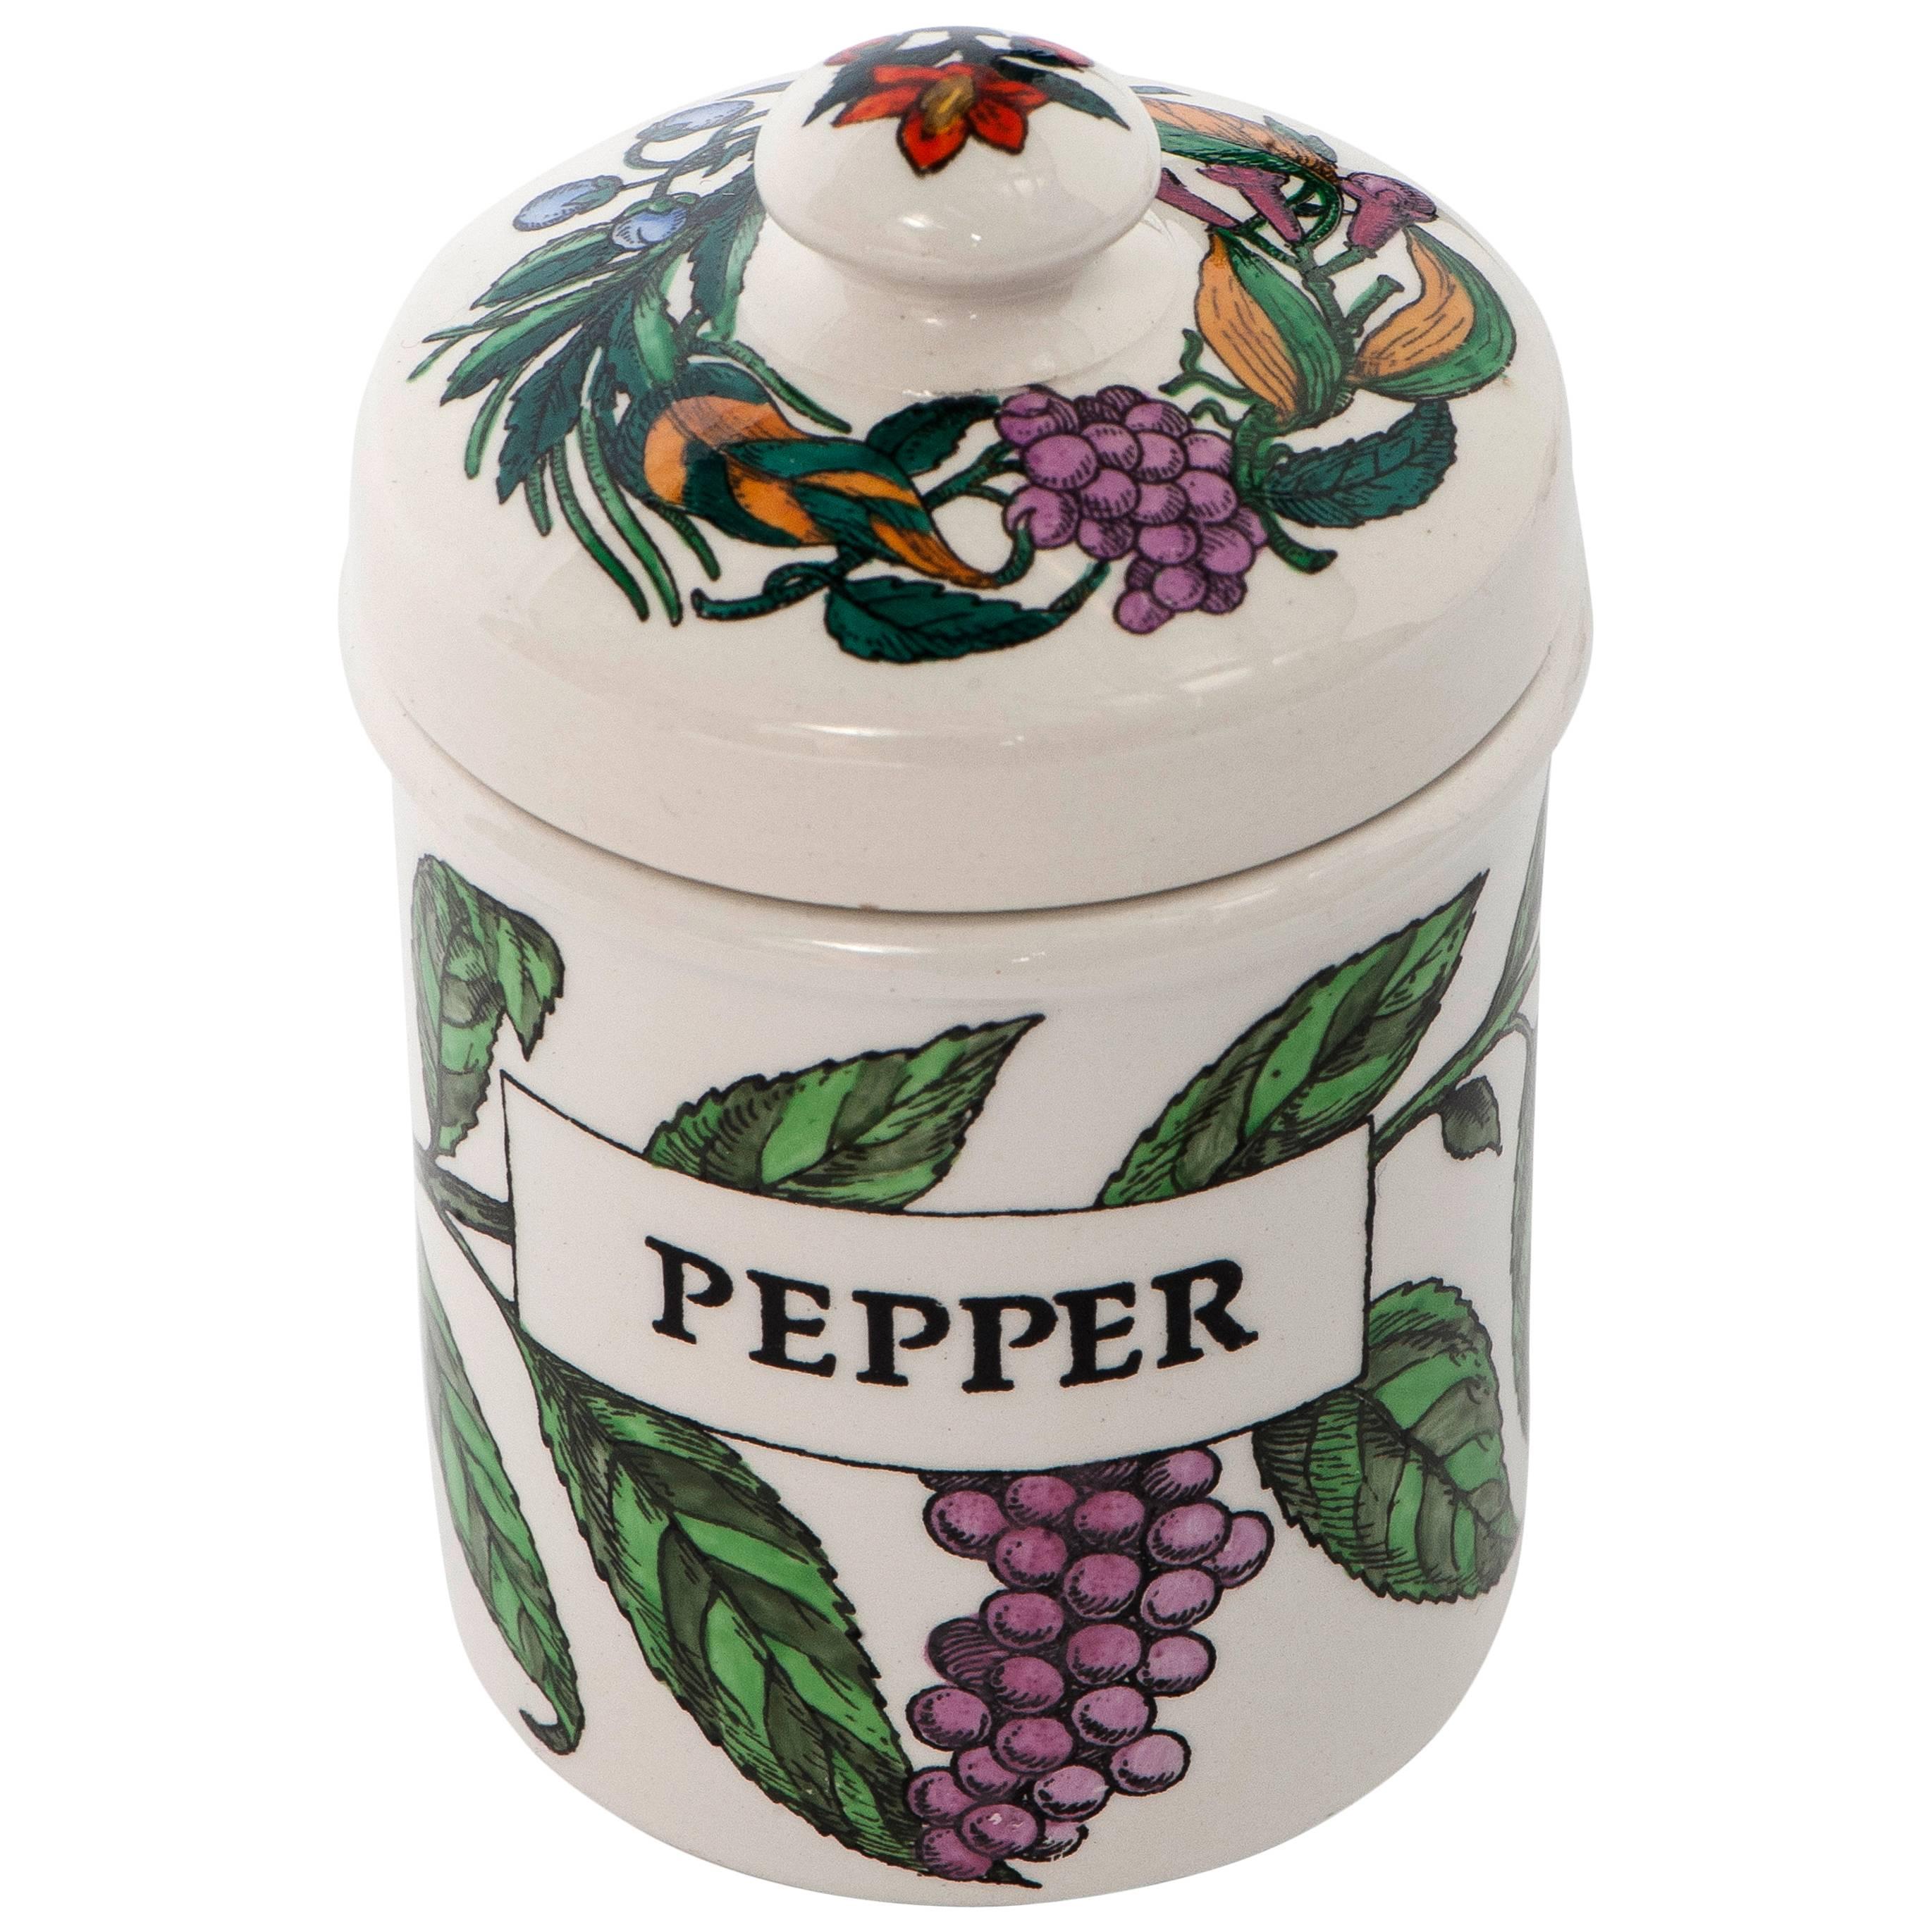 Piero Fornasetti porcelain pepper jar with cover, Italy circa 1960 For Sale